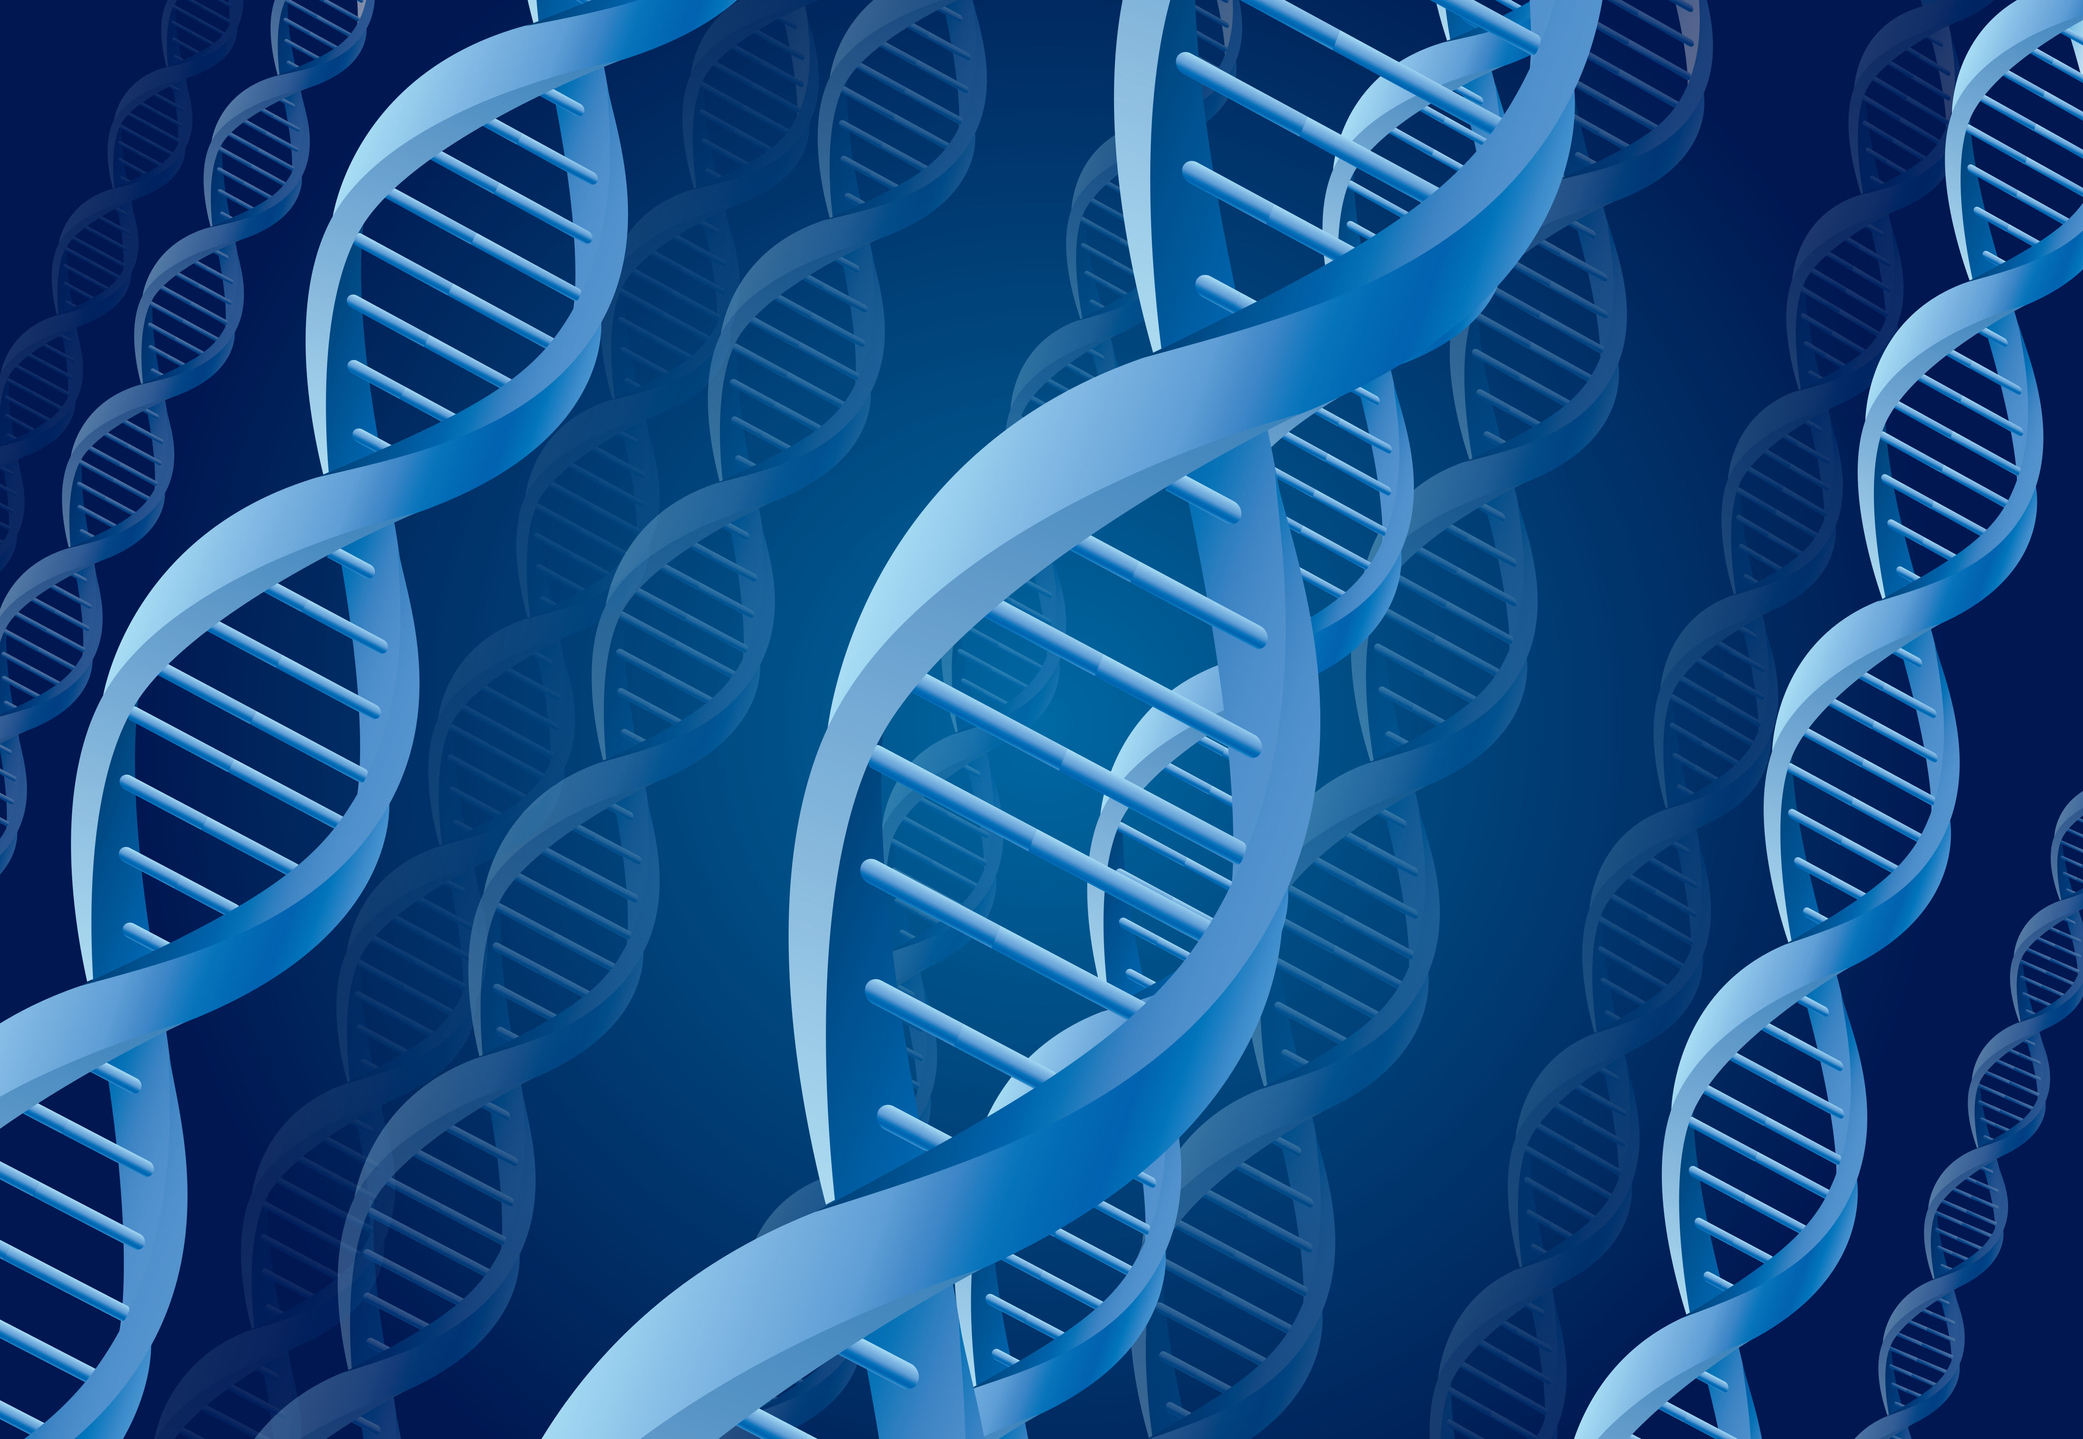 Shared DNA: How Much DNA Do You Share with Your Relatives?